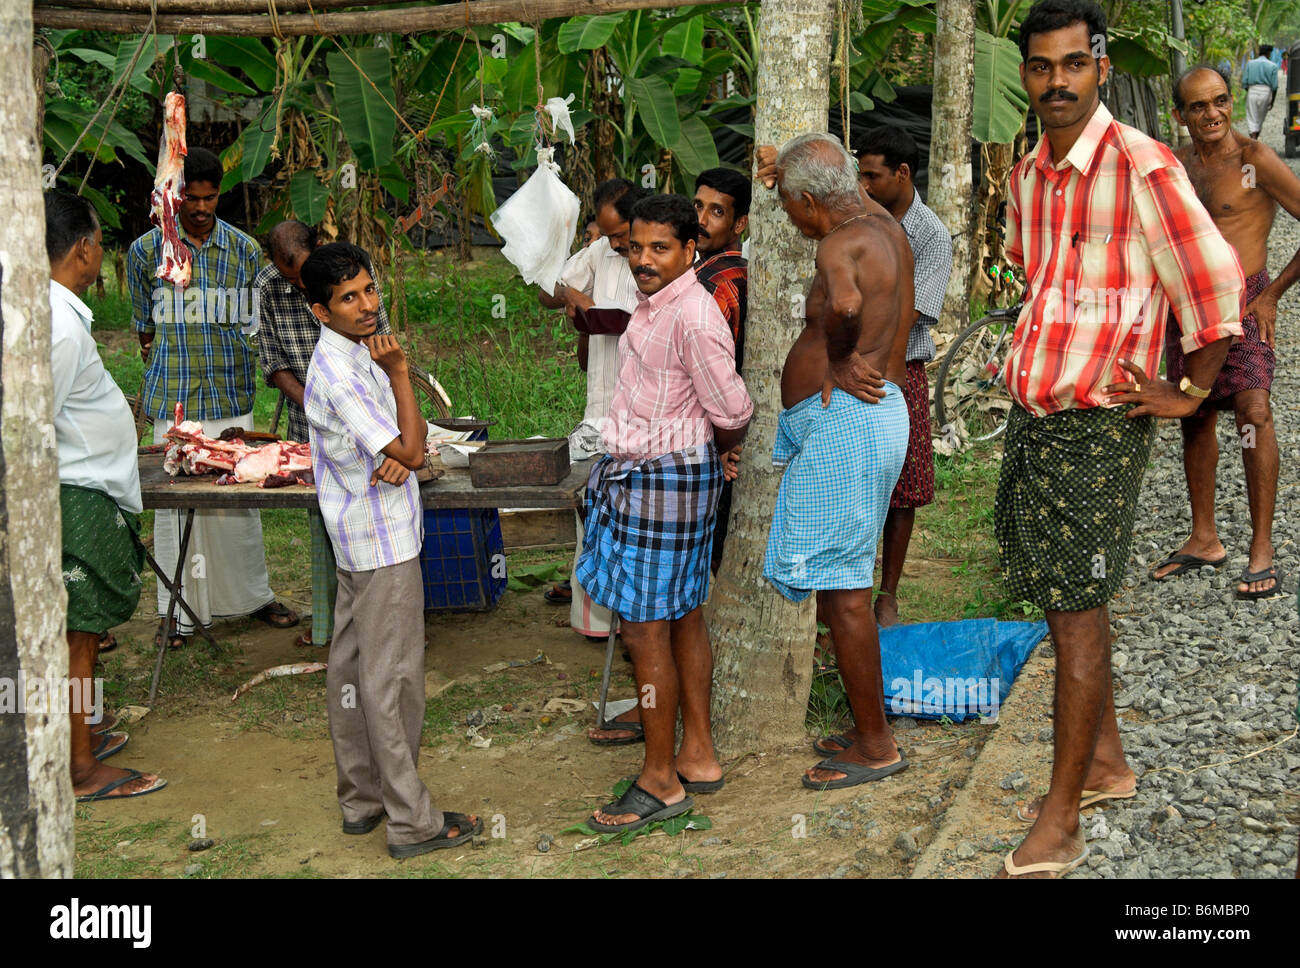 Customers in rural India waiting as meat is cut up Kerala India Stock Photo